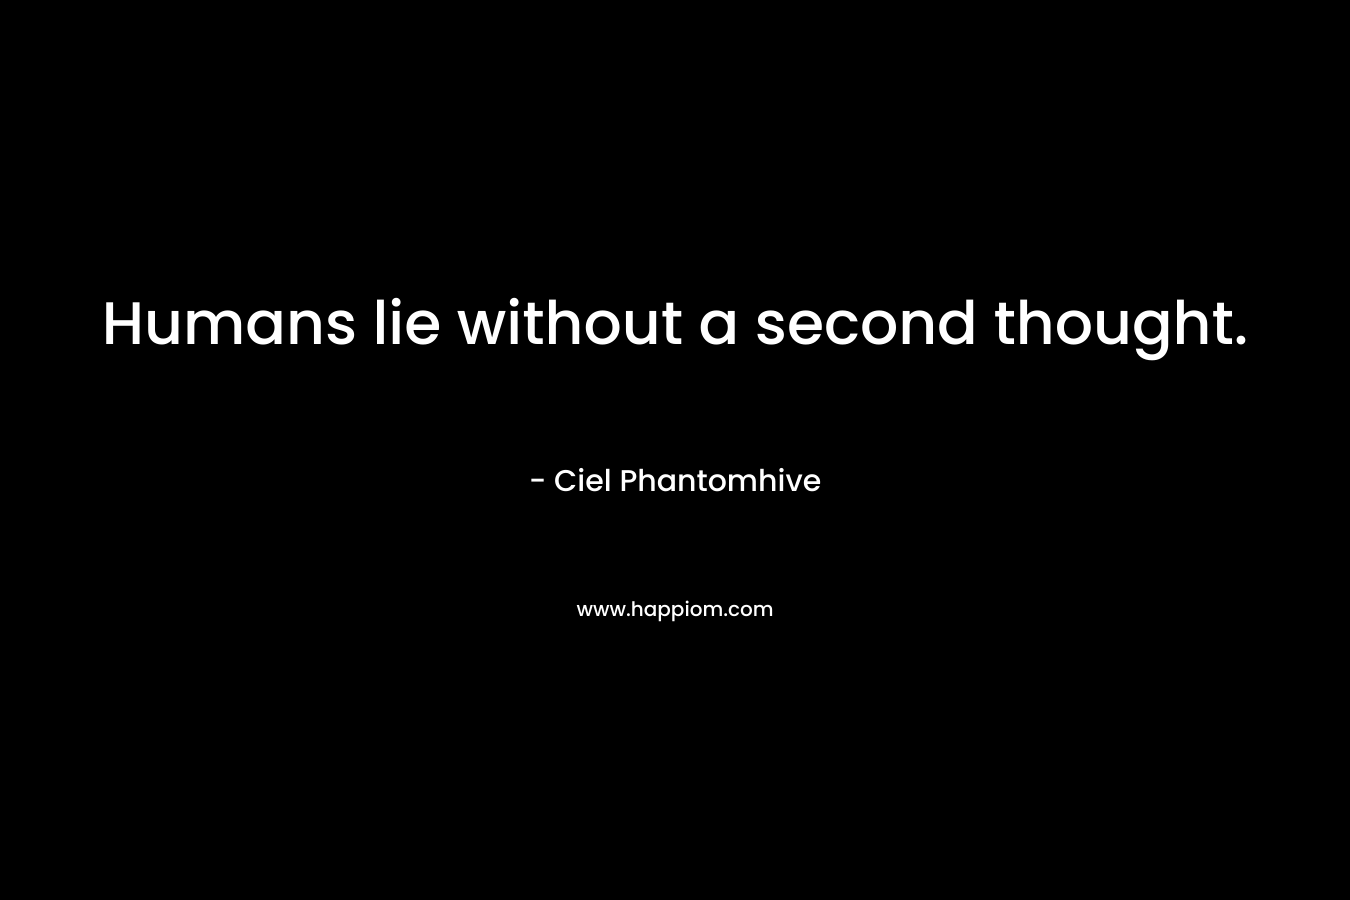 Humans lie without a second thought.